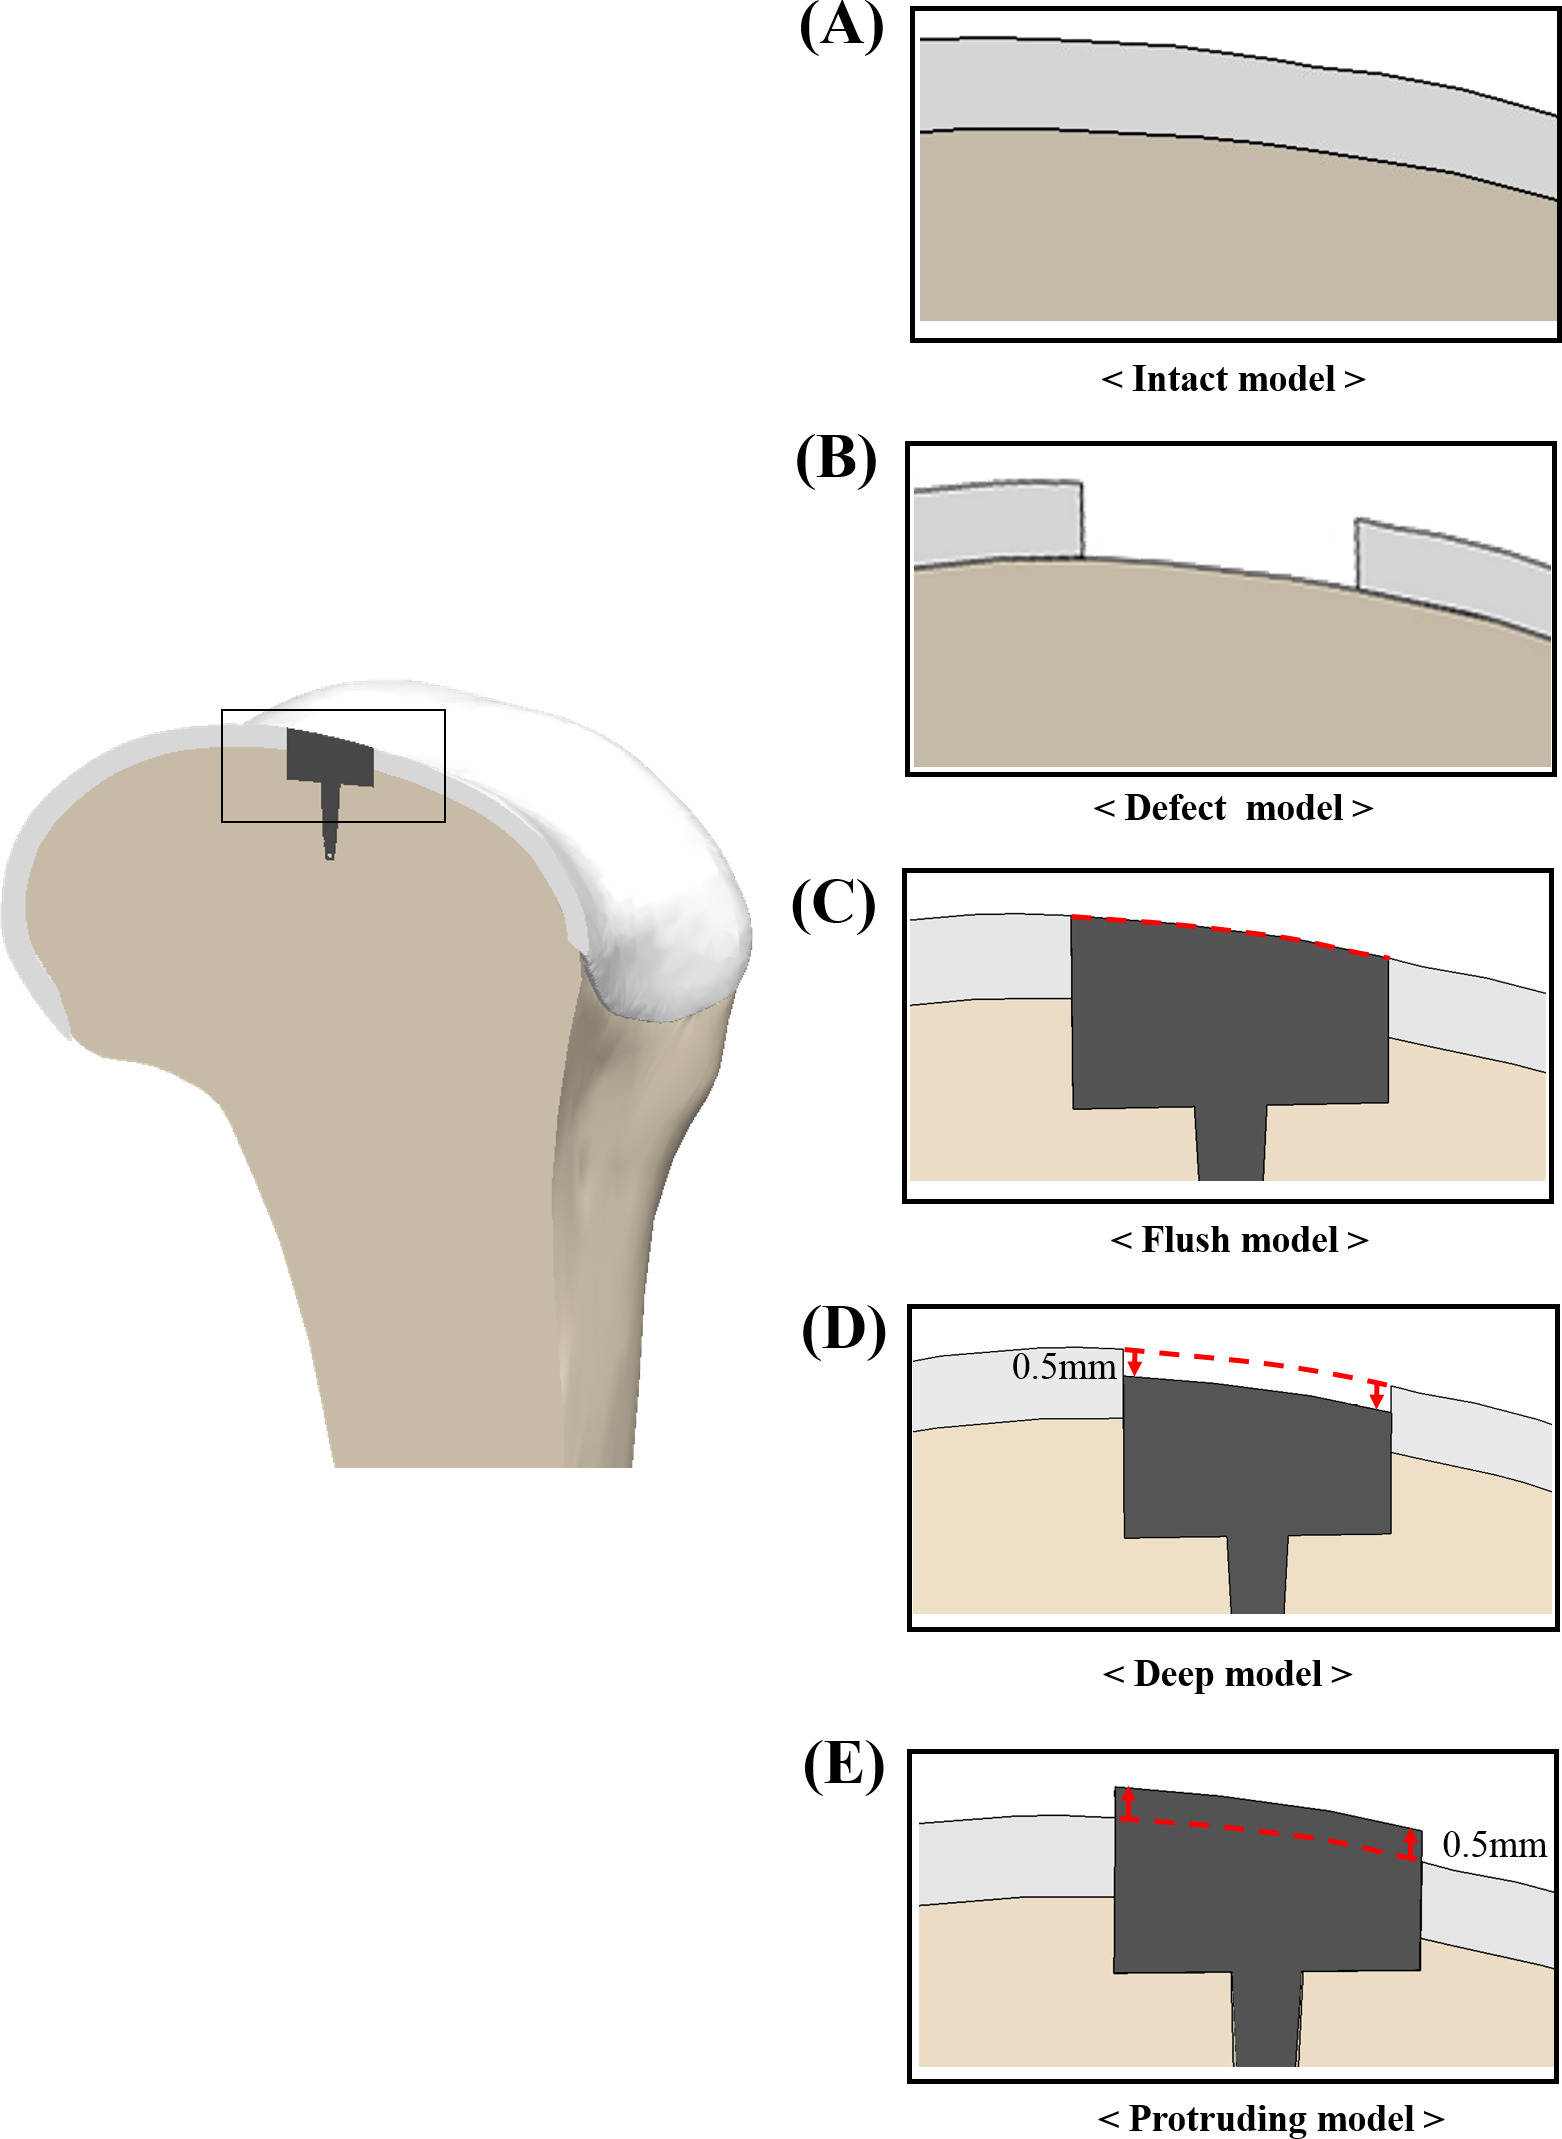 Fig. 2 
            Models of implants under three different insertion positions: a) intact model; b) defect model; c) flush model; d) 0.5 mm deep position compared to surrounding cartilage; and e) 0.5 mm protruding deep position compared to surrounding cartilage.
          